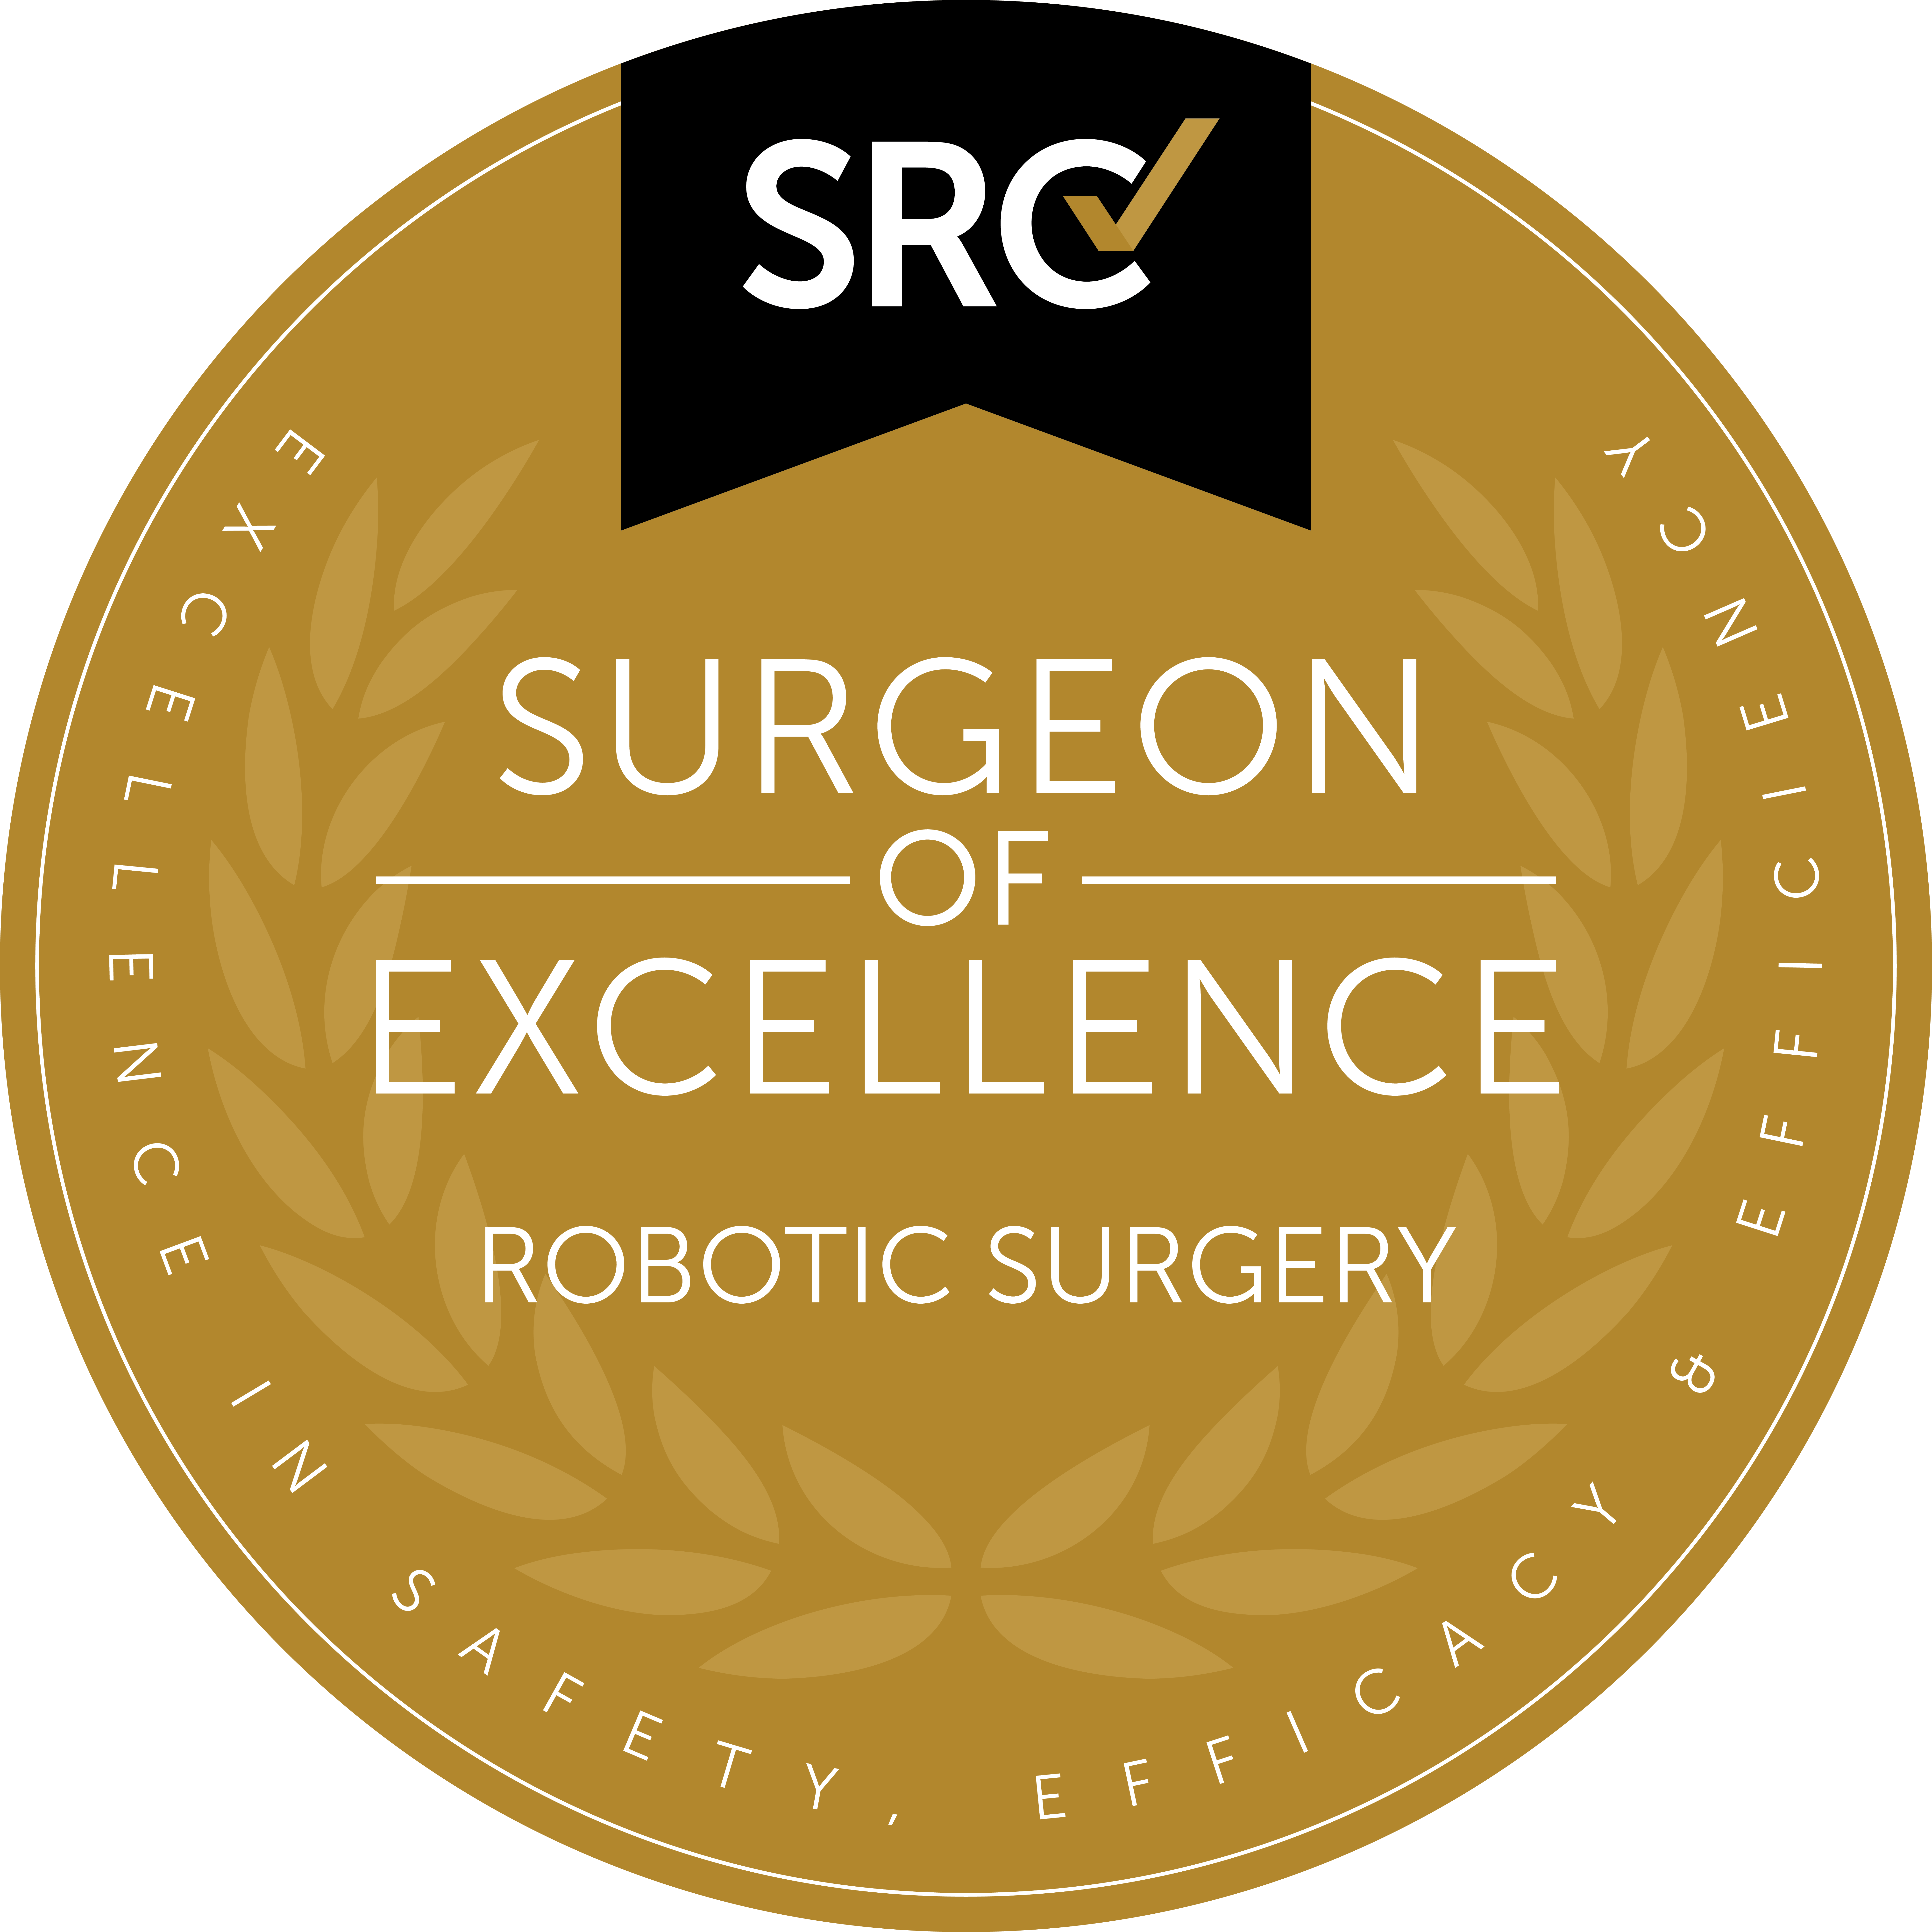 Surgeon of excellence robotic surgery badge